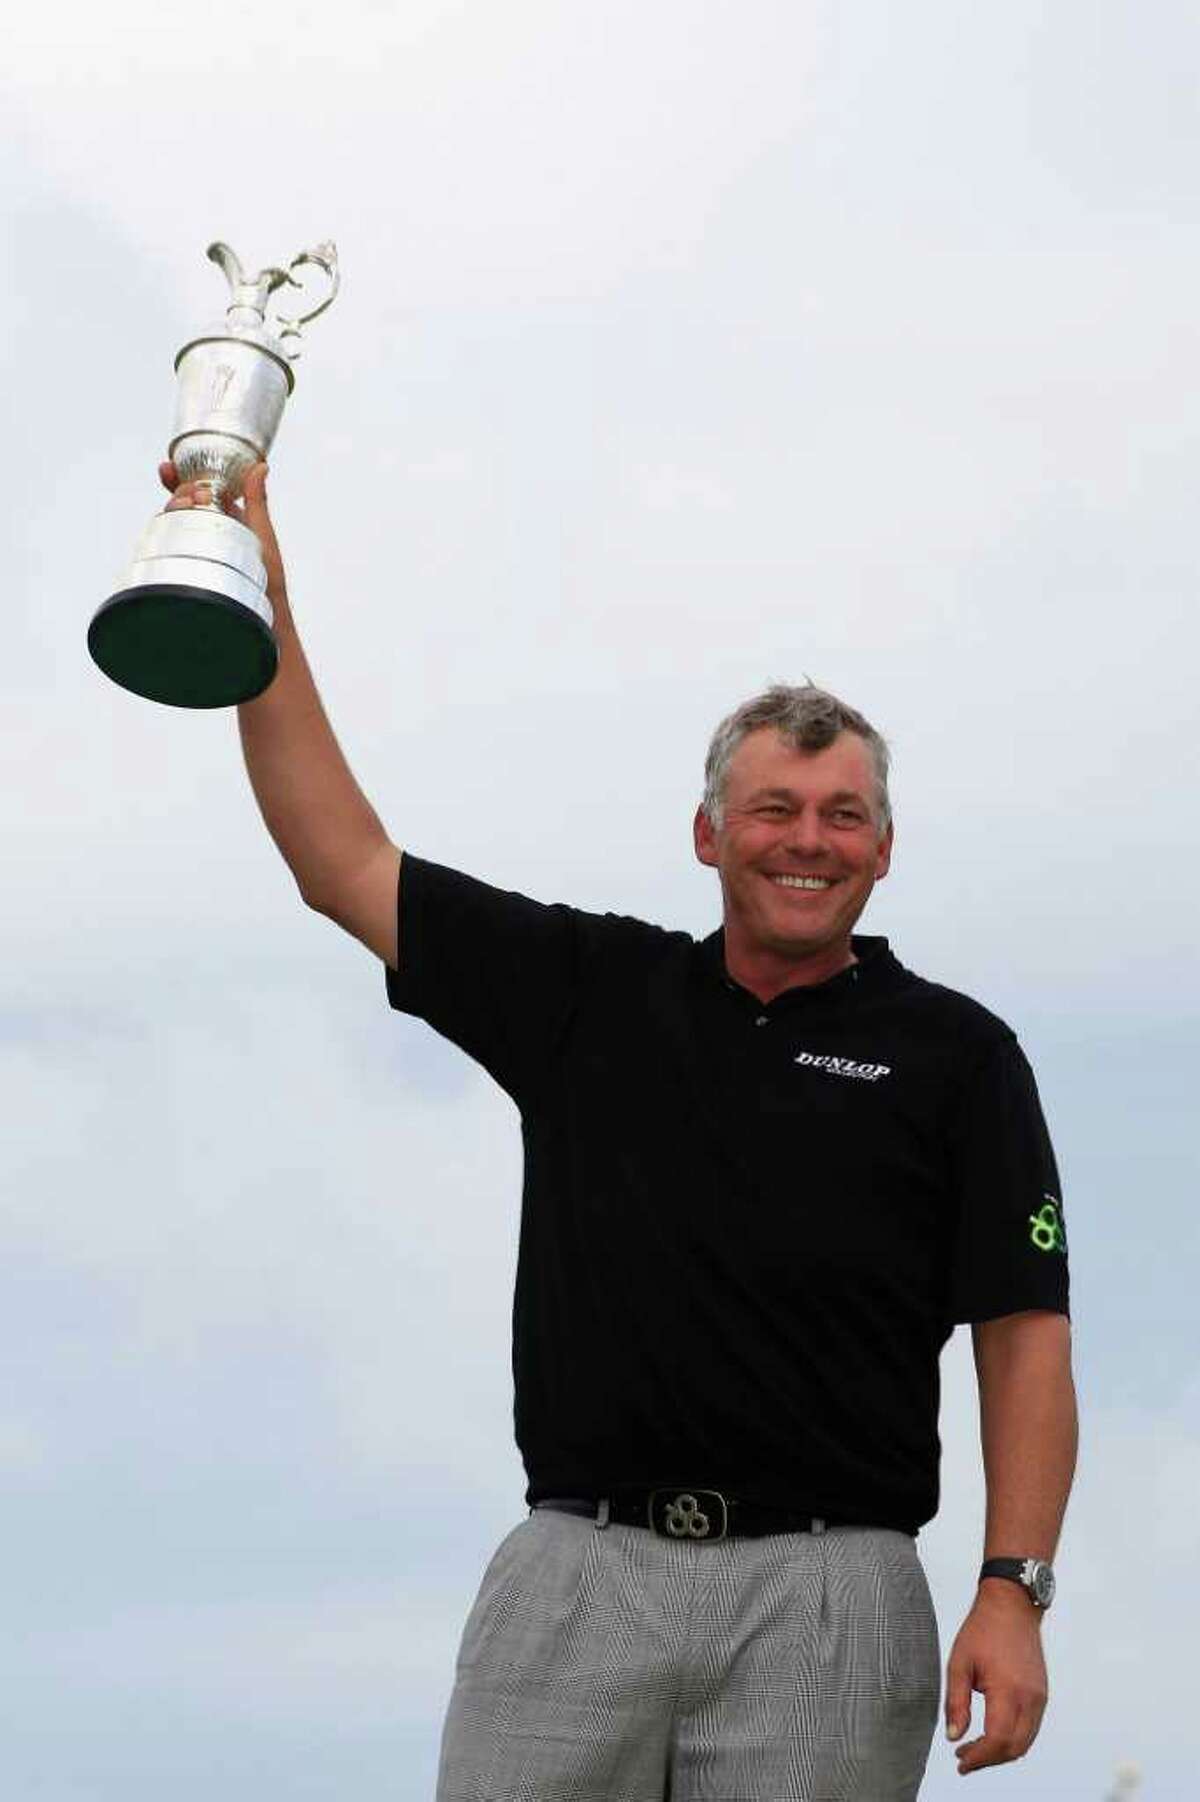 SANDWICH, ENGLAND - JULY 17: Darren Clarke of Northern Ireland holds the Claret Jug aloft following his victory at the end of the final round of The 140th Open Championship at Royal St George's on July 17, 2011 in Sandwich, England. (Photo by Streeter Lecka/Getty Images)